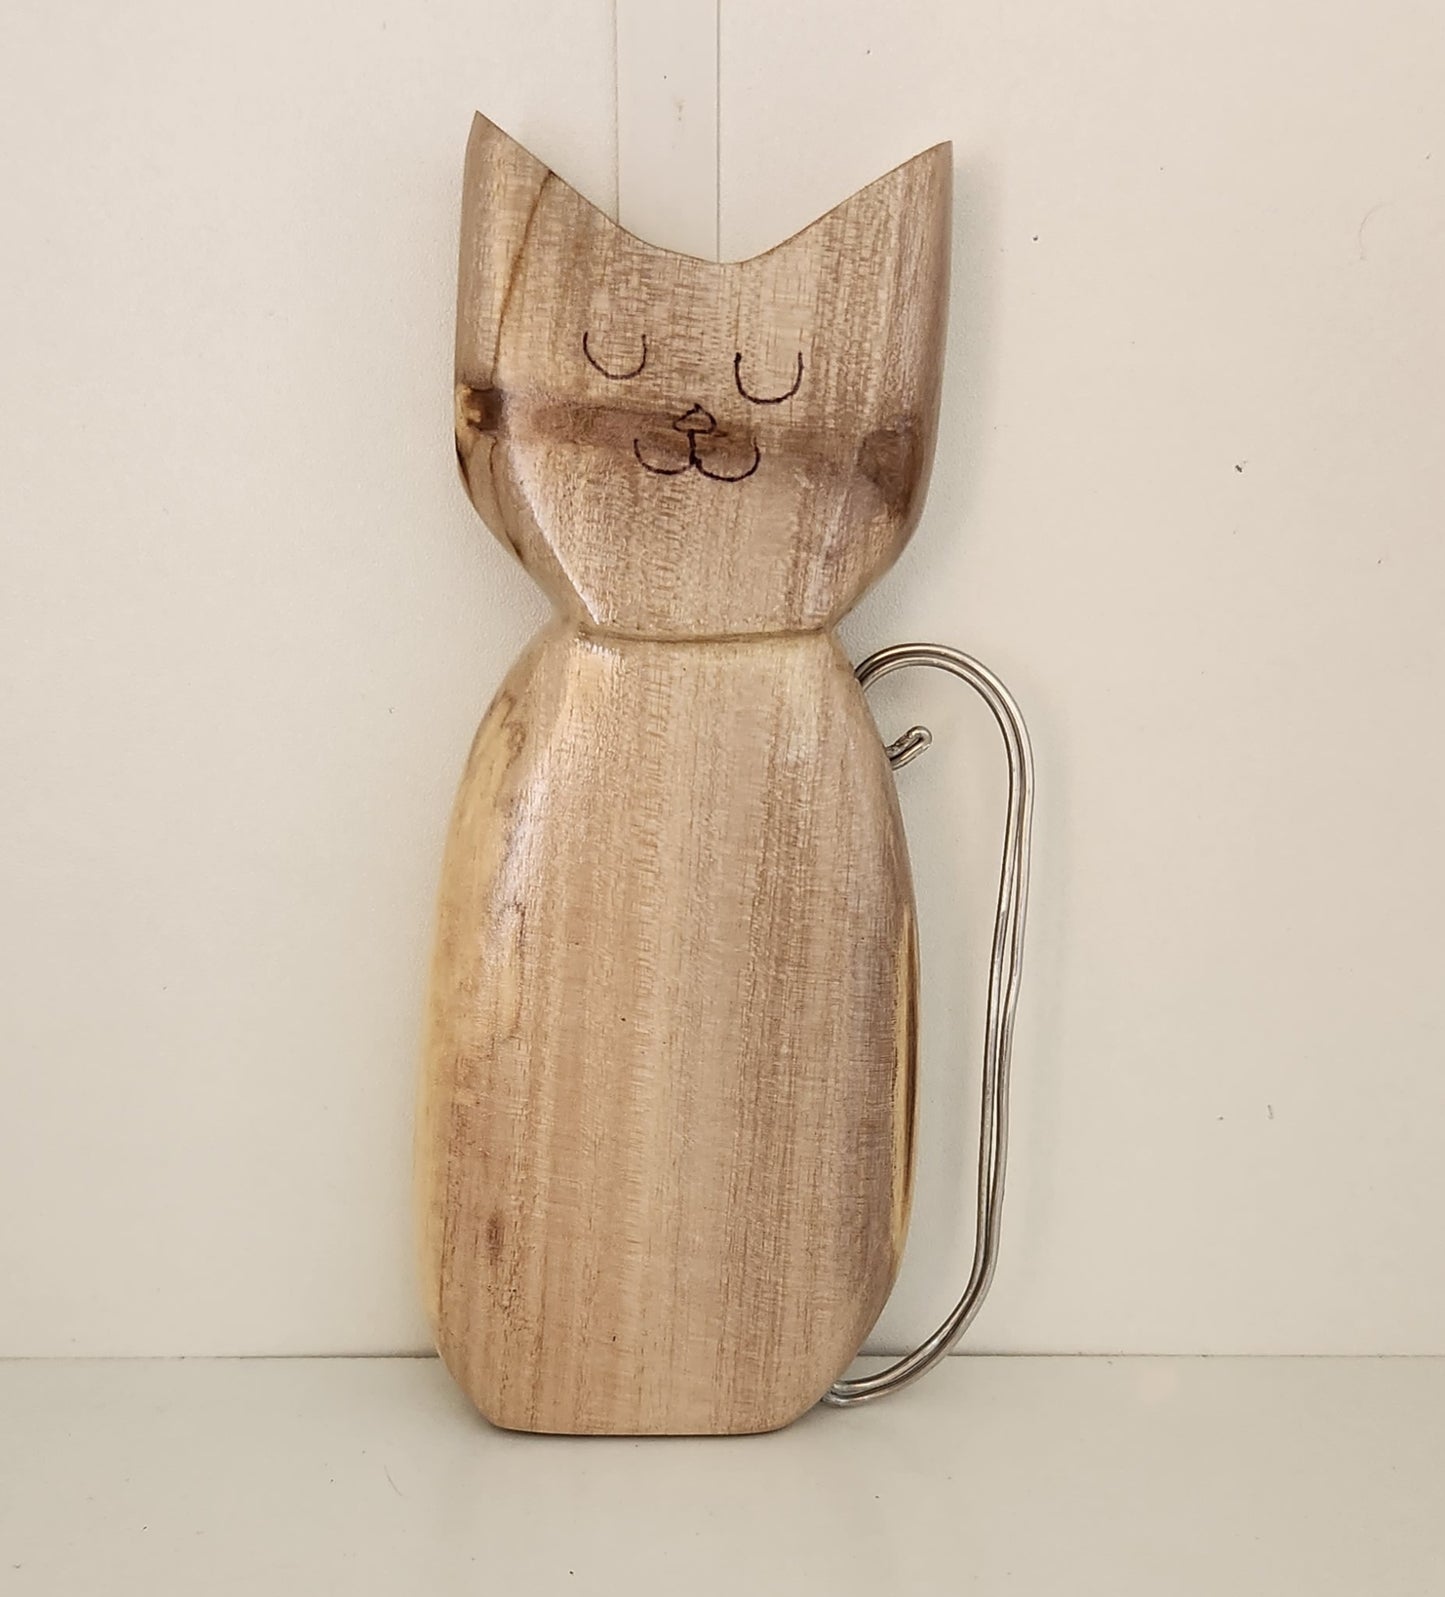 Hand Carved Cats 3 to choose from in Pine, Burau or Miro Wood